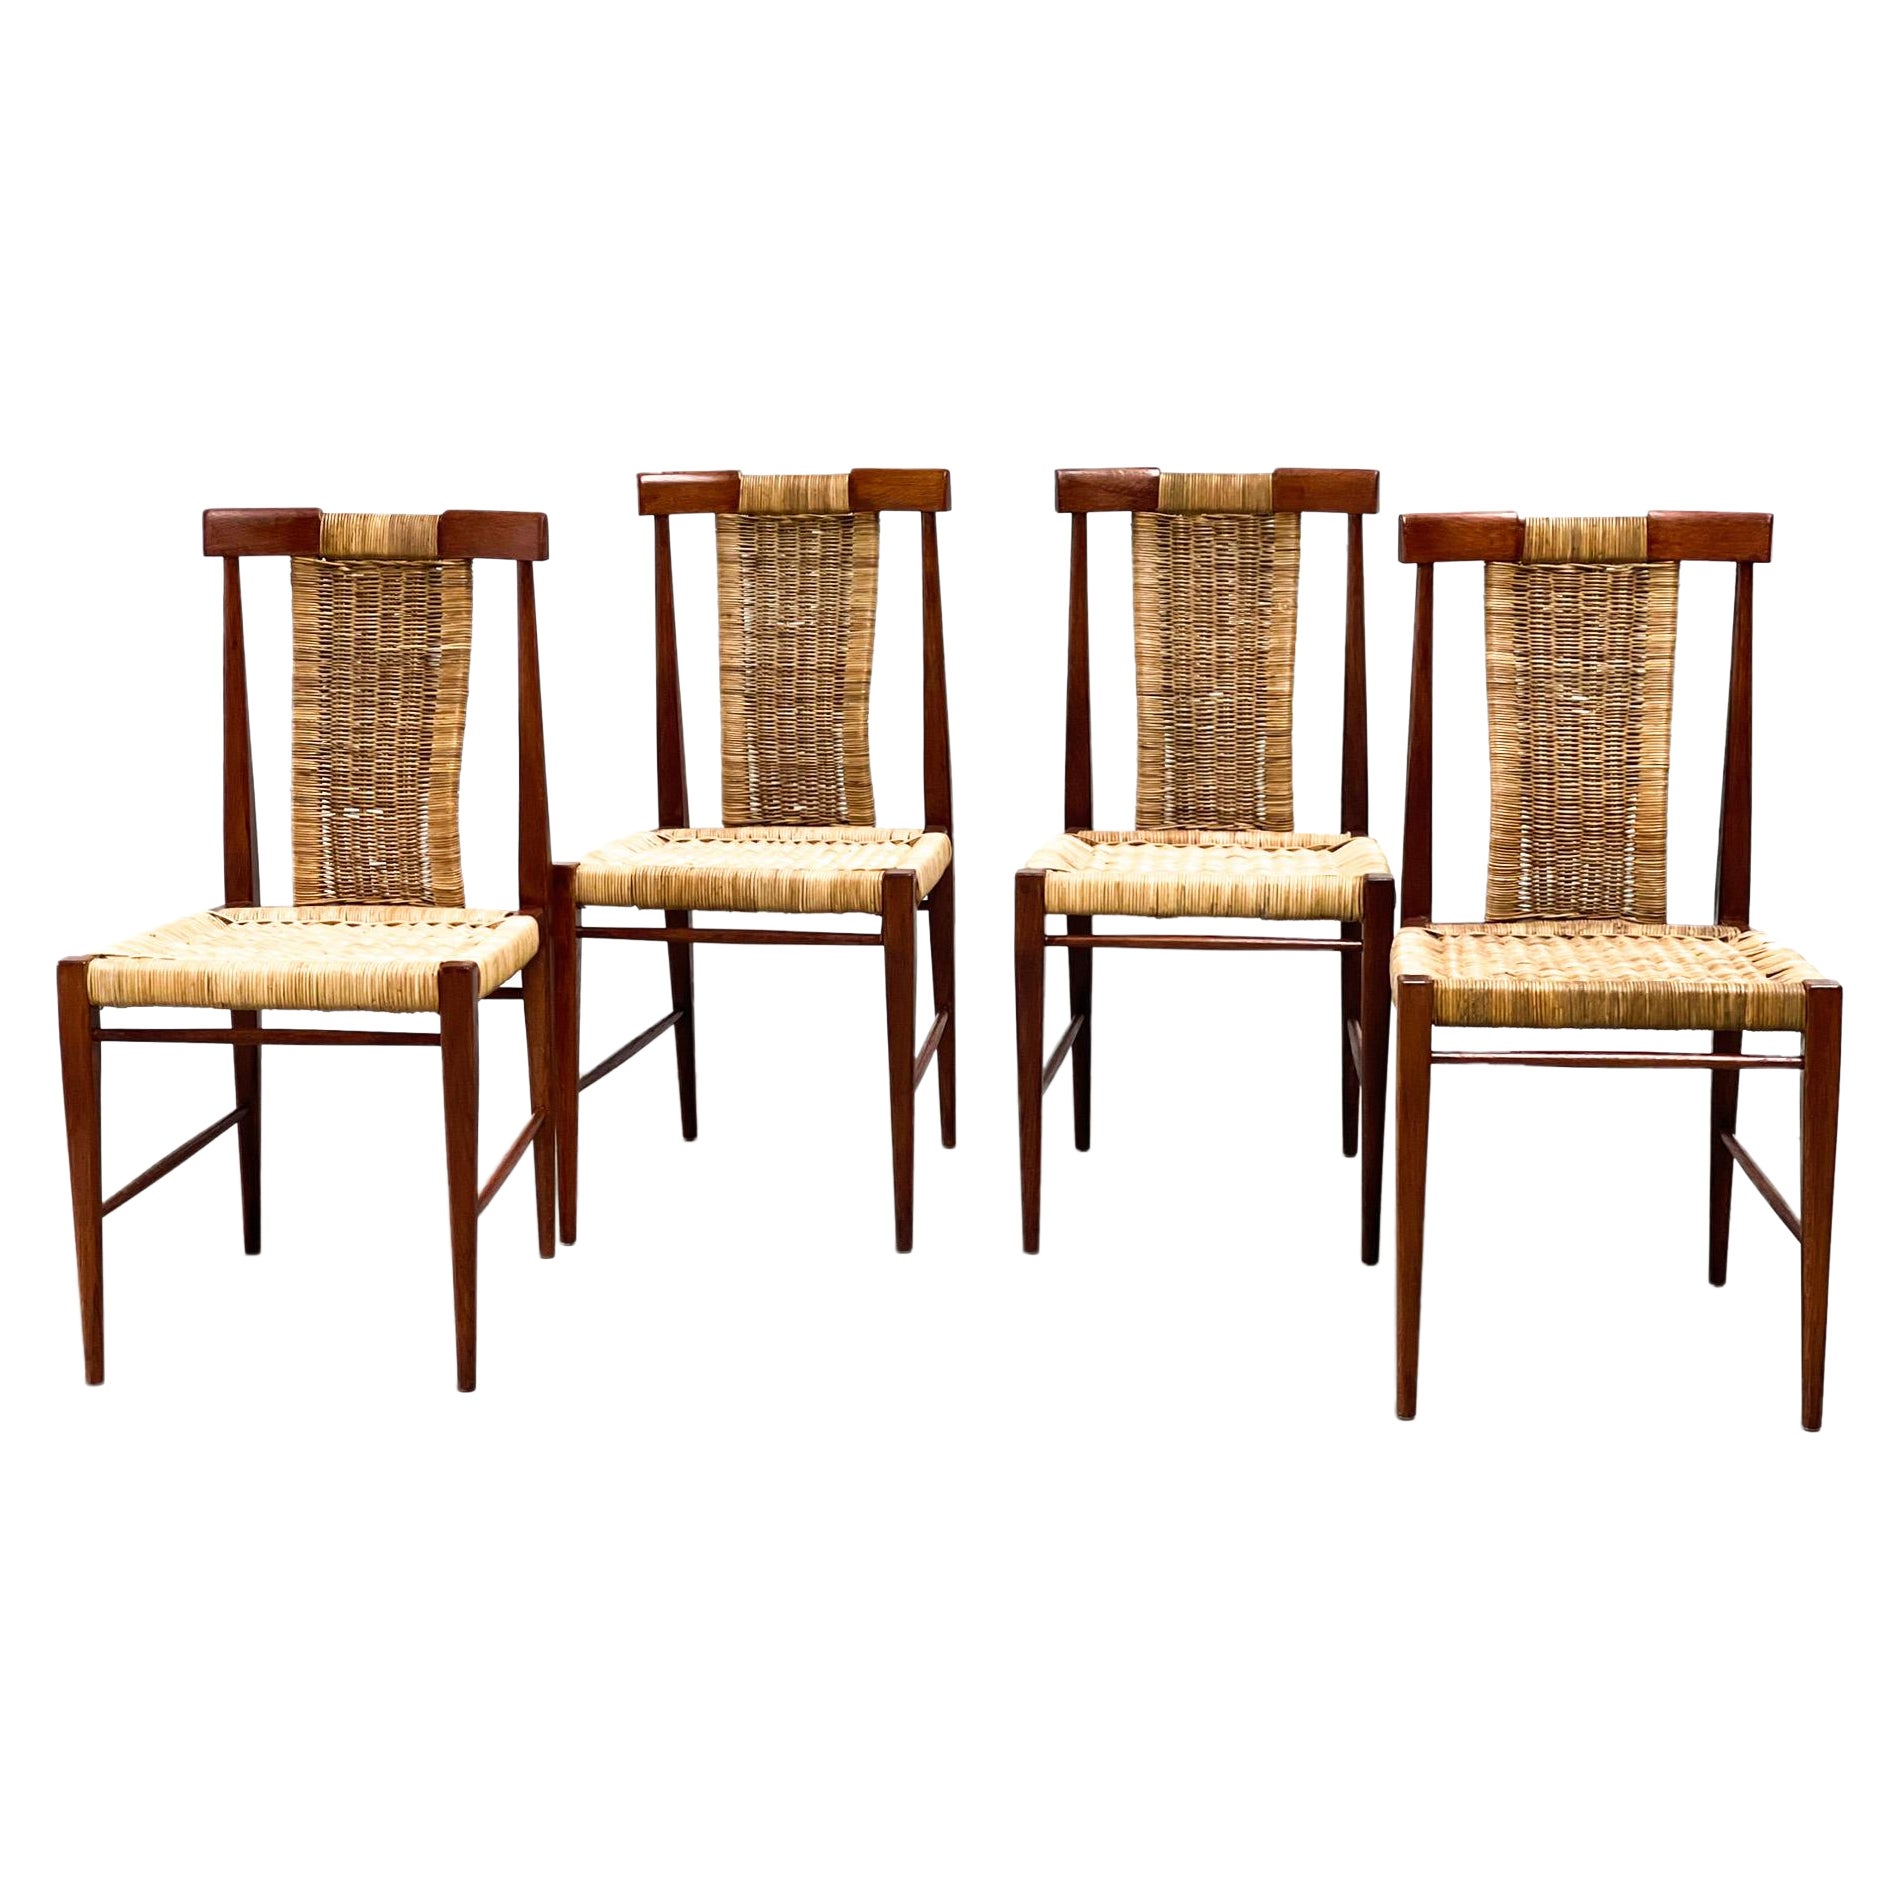 Vintage Teak and Wicker Dining Chairs, 1960s For Sale